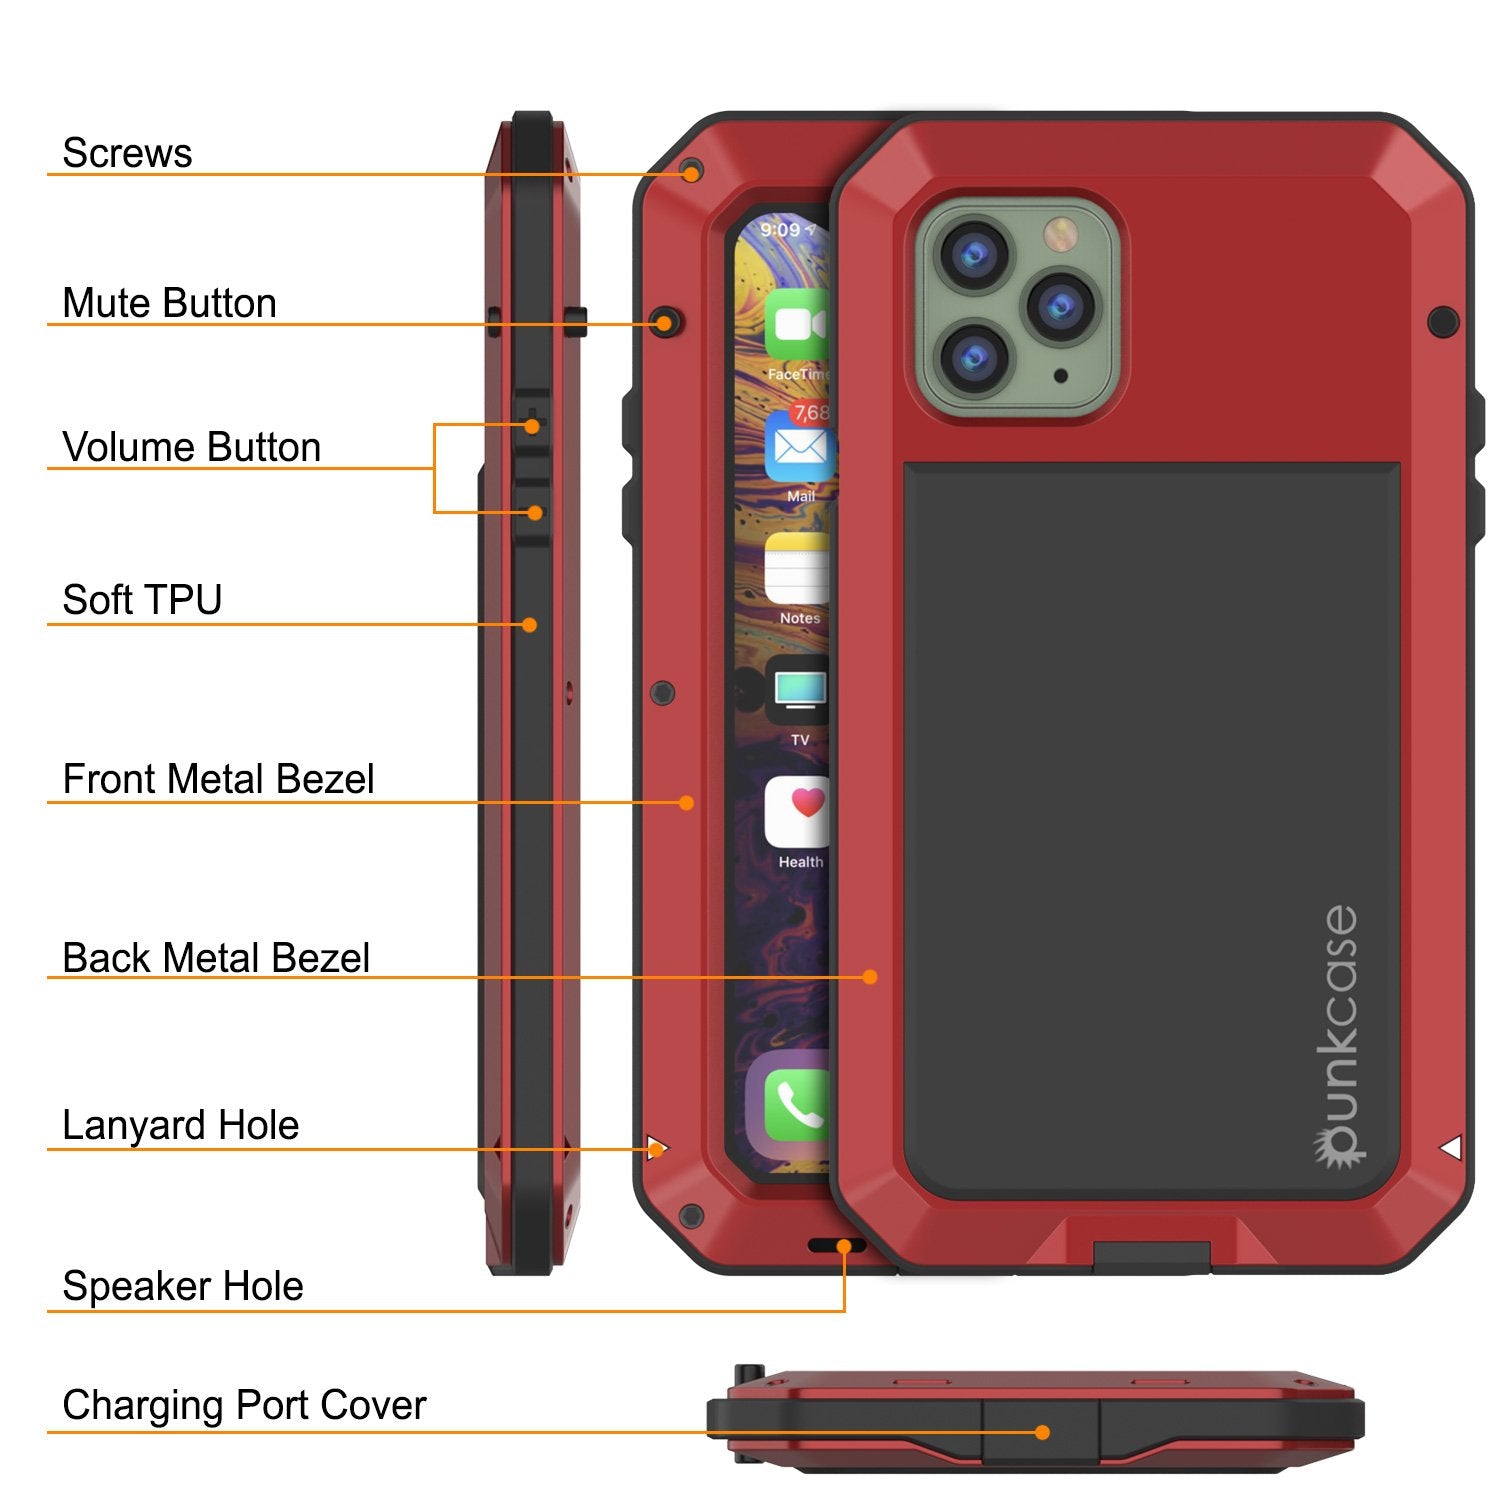 iPhone 11 Pro Max Metal Case, Heavy Duty Military Grade Armor Cover [shock proof] Full Body Hard [Red]